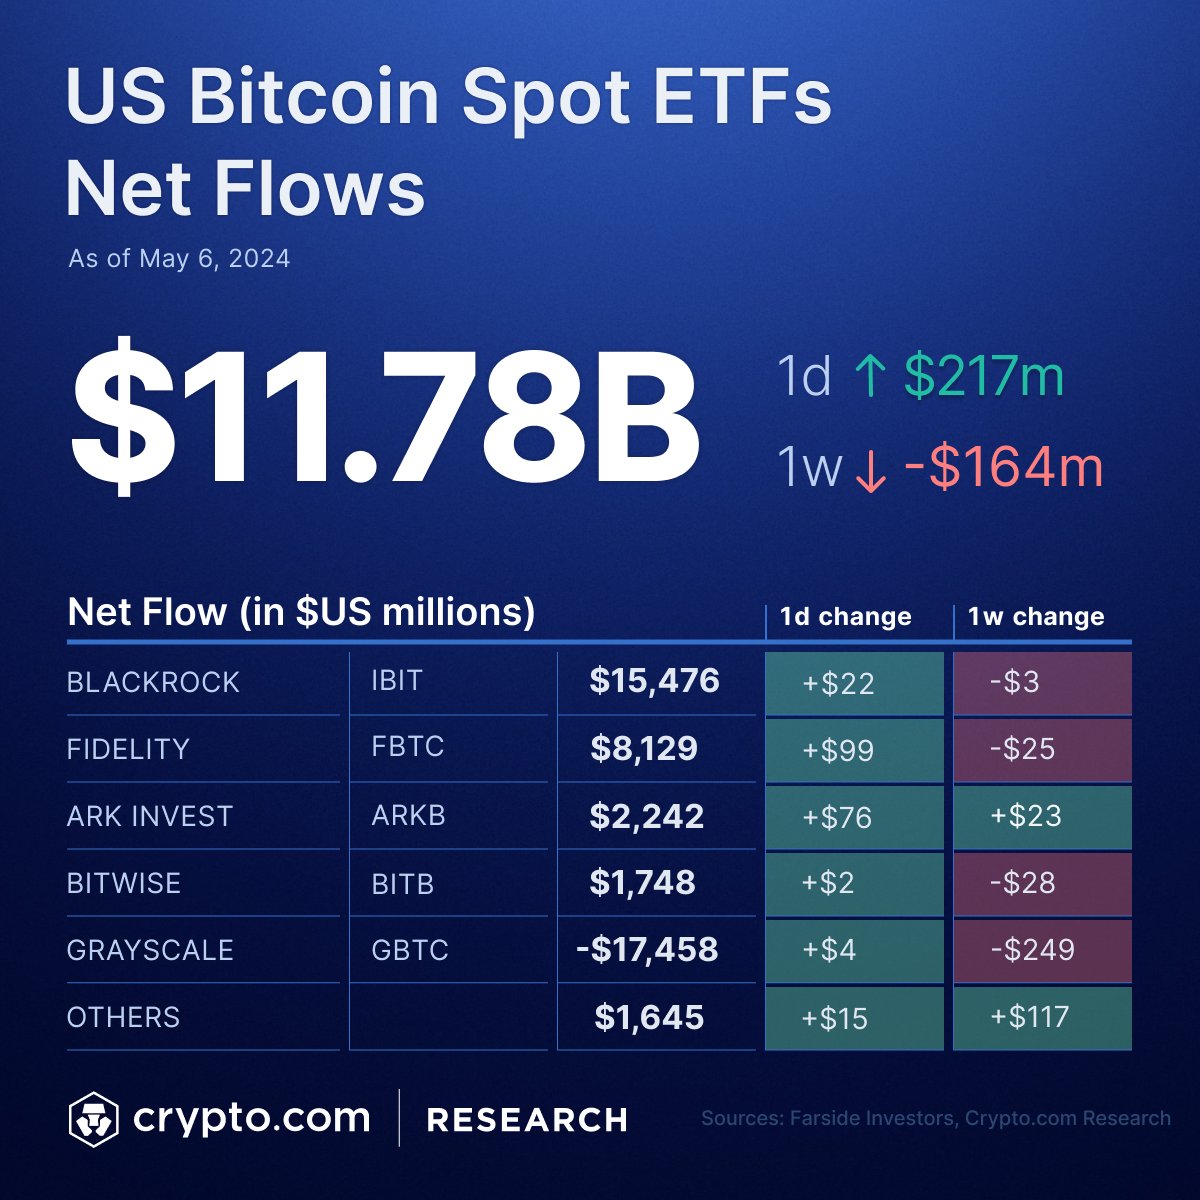 💸 Latest data shows US Spot #Bitcoin ETFs with a total net inflow of $11.78B and a daily net inflow of $217M on 6 May. Grayscale’s GBTC saw its second day of net inflows of $4M since launch.